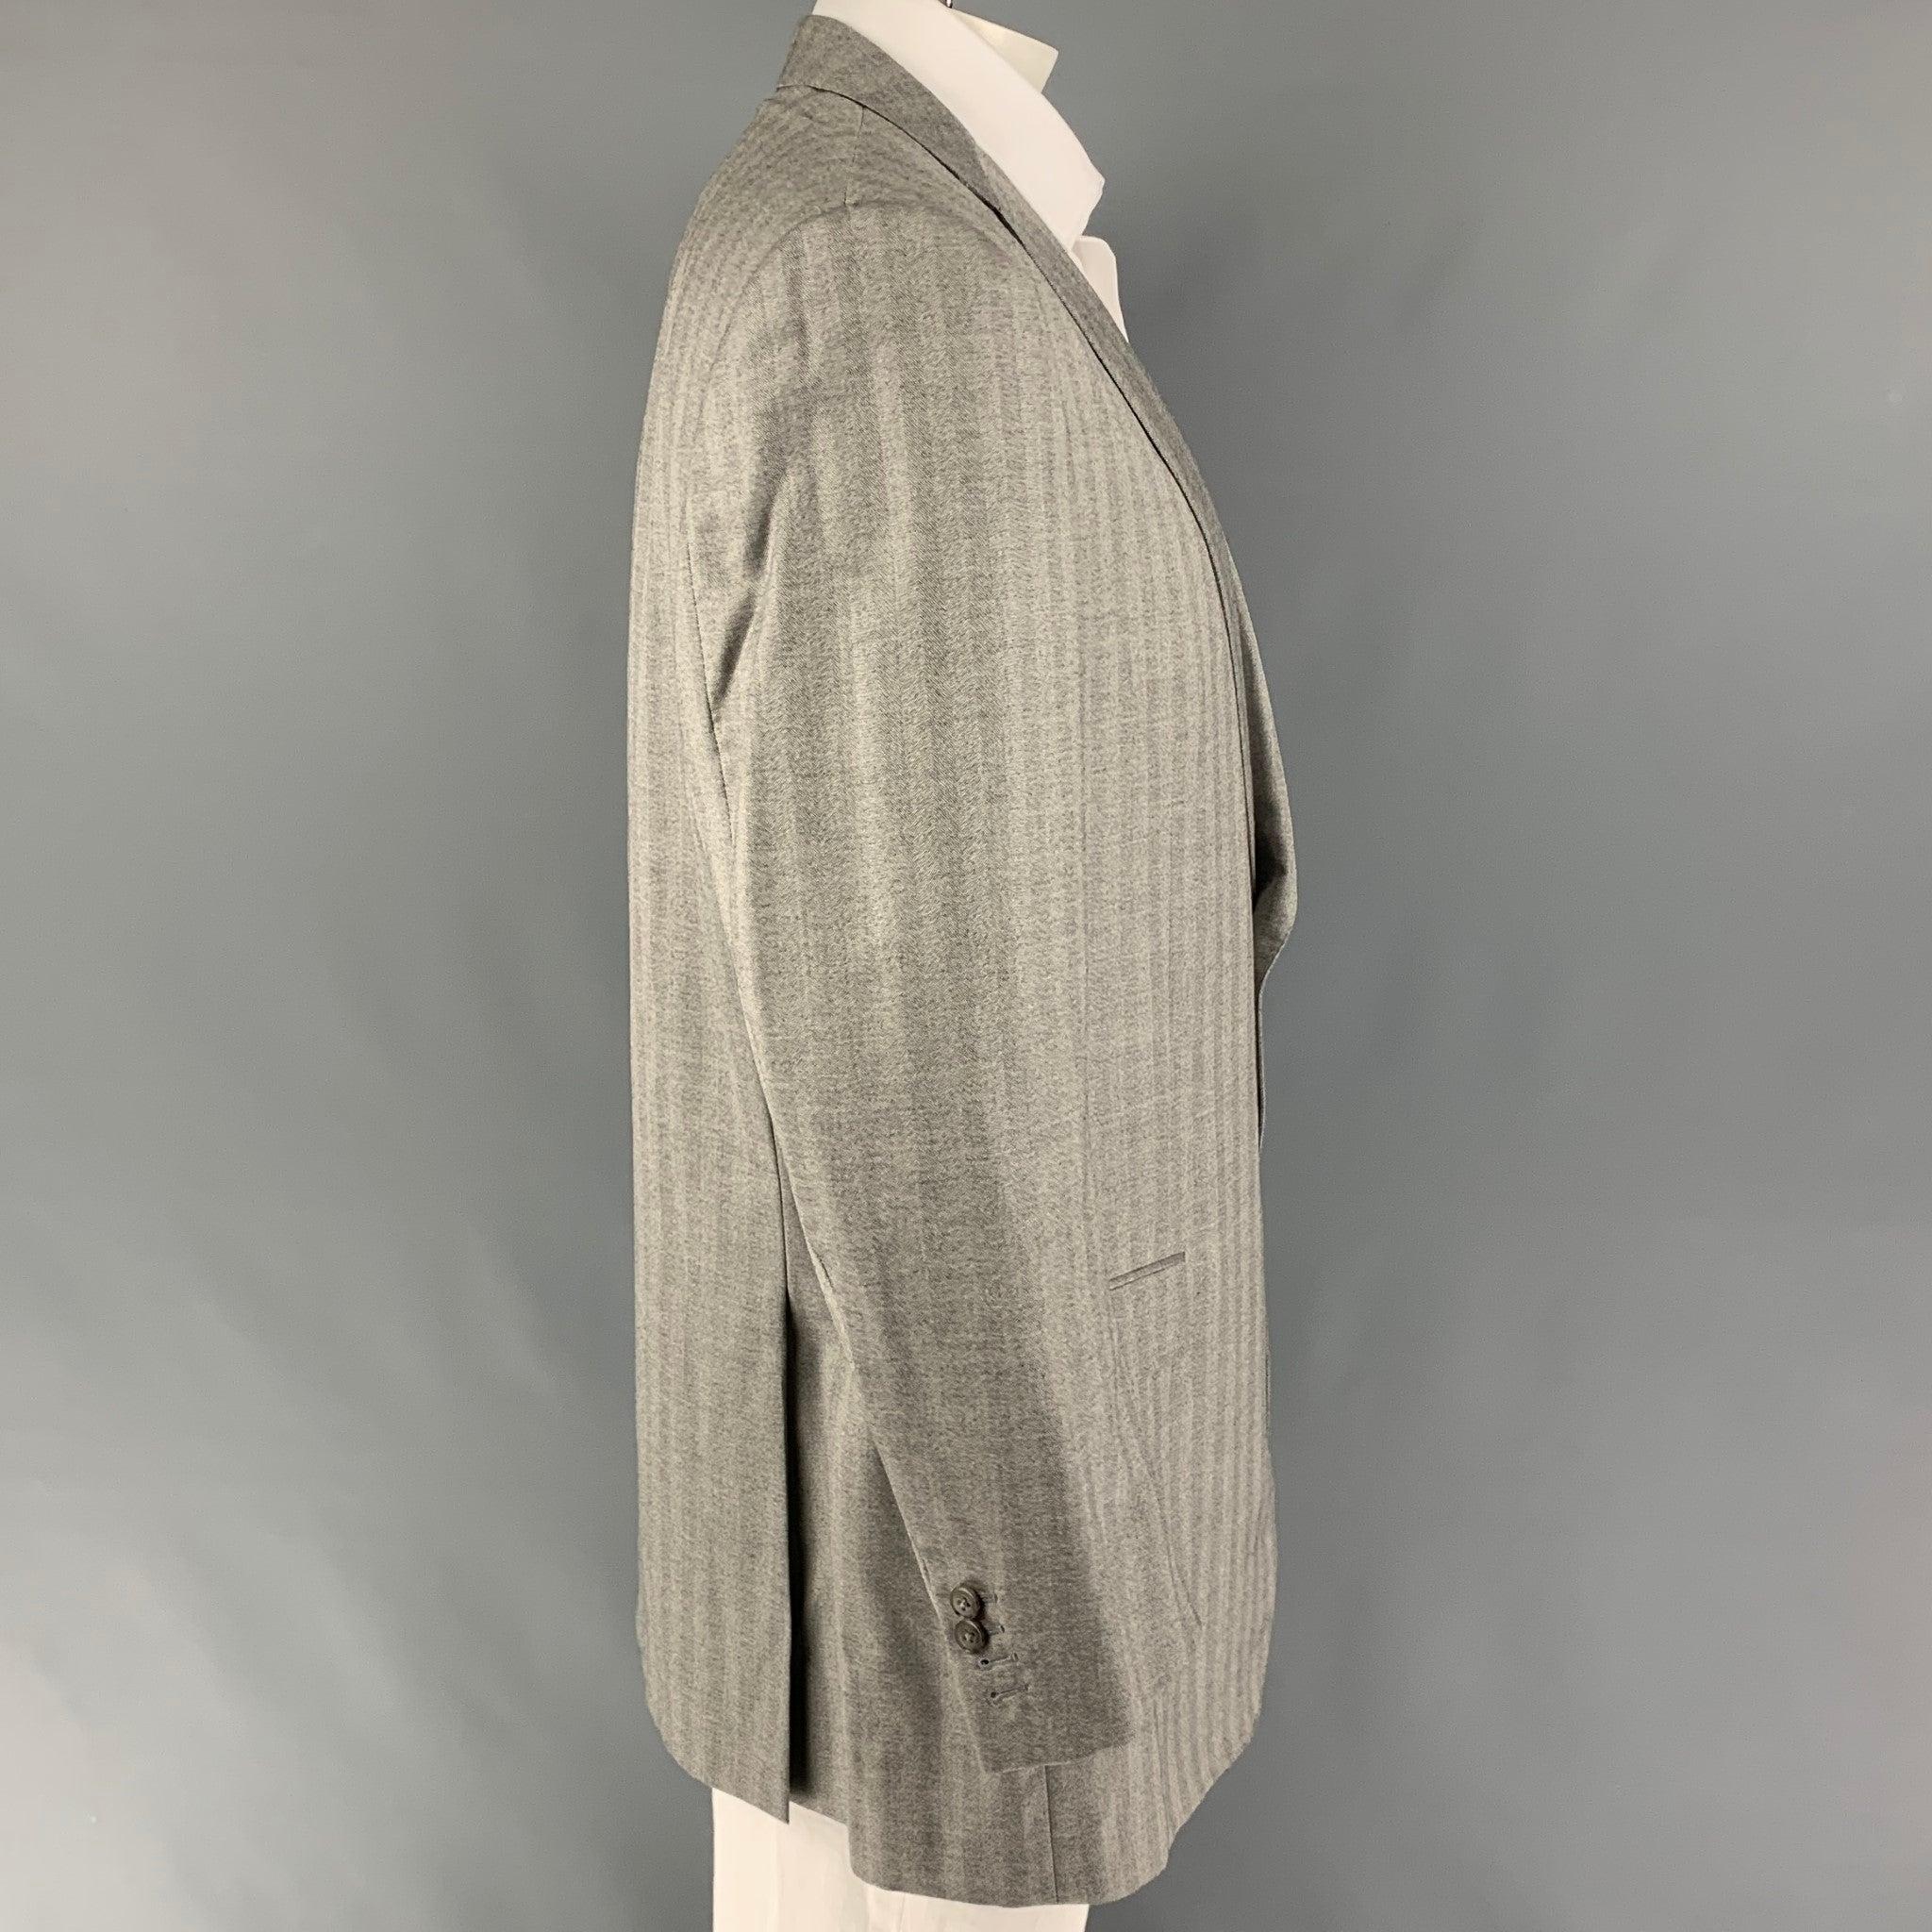 ERMENEGILDO ZEGNA
sport coat comes in a light gray herringbone cashmere / silk with a full liner featuring a notch lapel, flap pockets, double vent, and a double button closure. Very Good Pre-Owned Condition. 

Marked:   60 L  

Measurements: 
